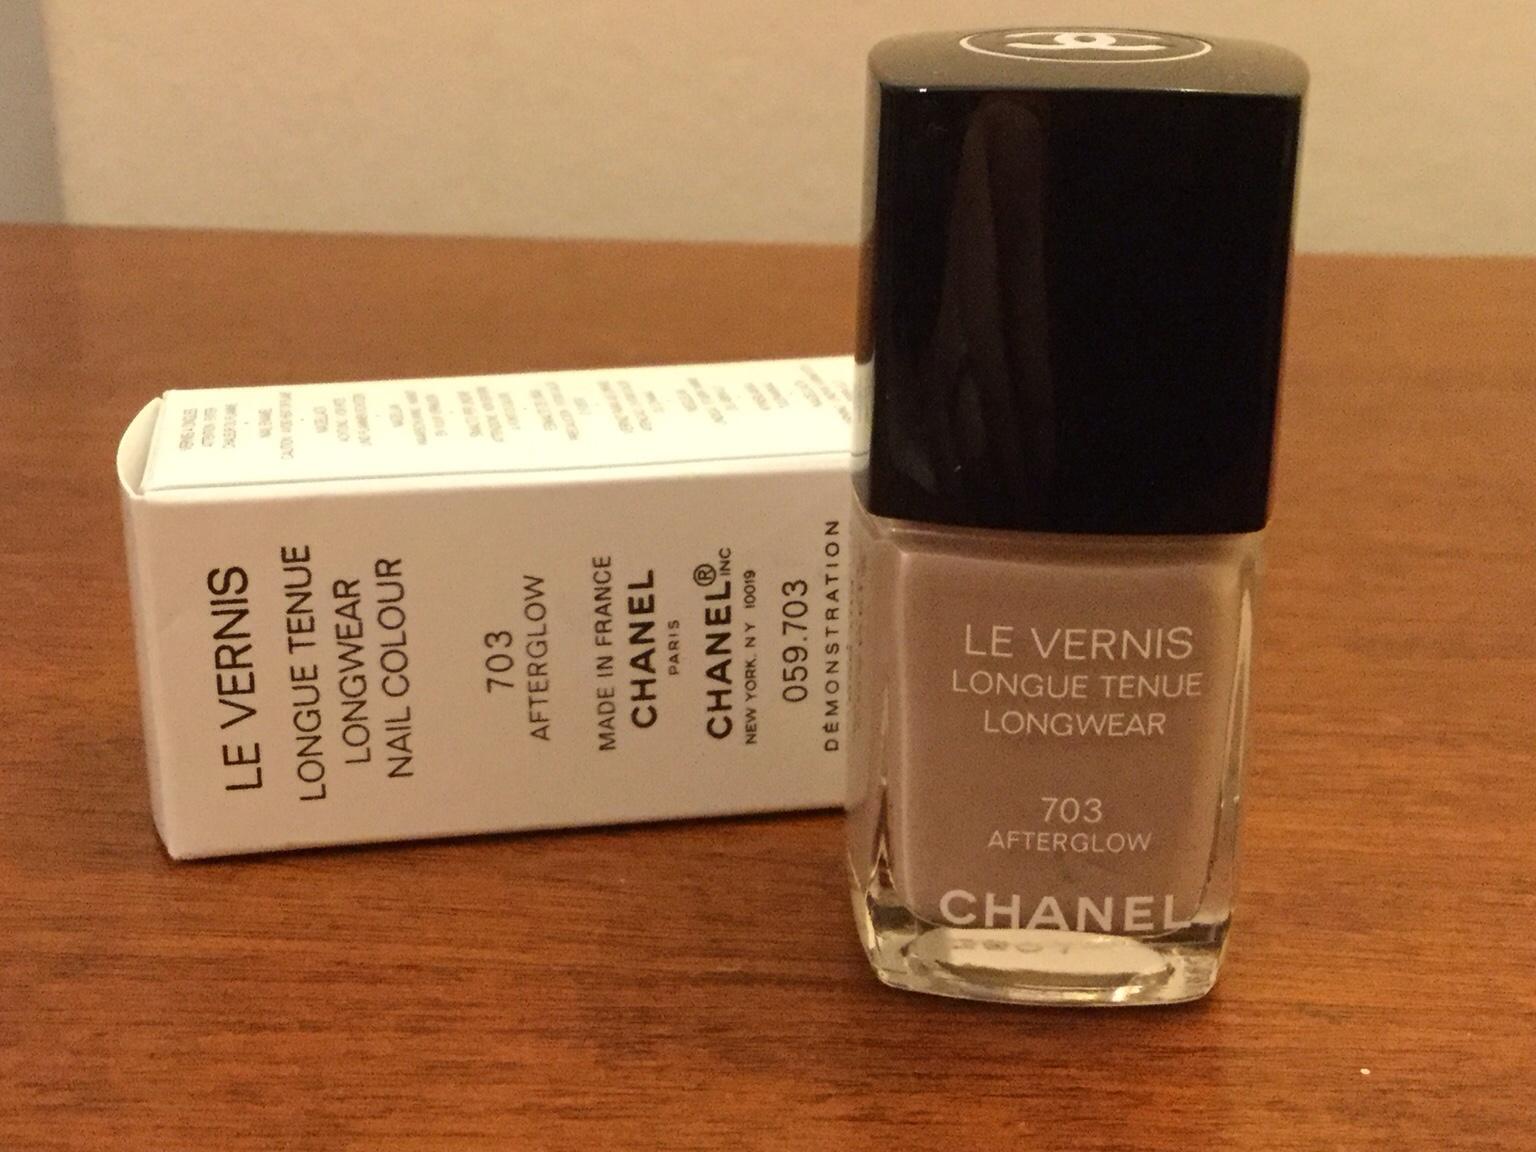 Chanel nail polish 703 Afterglow New in SW19 London for £ for sale |  Shpock